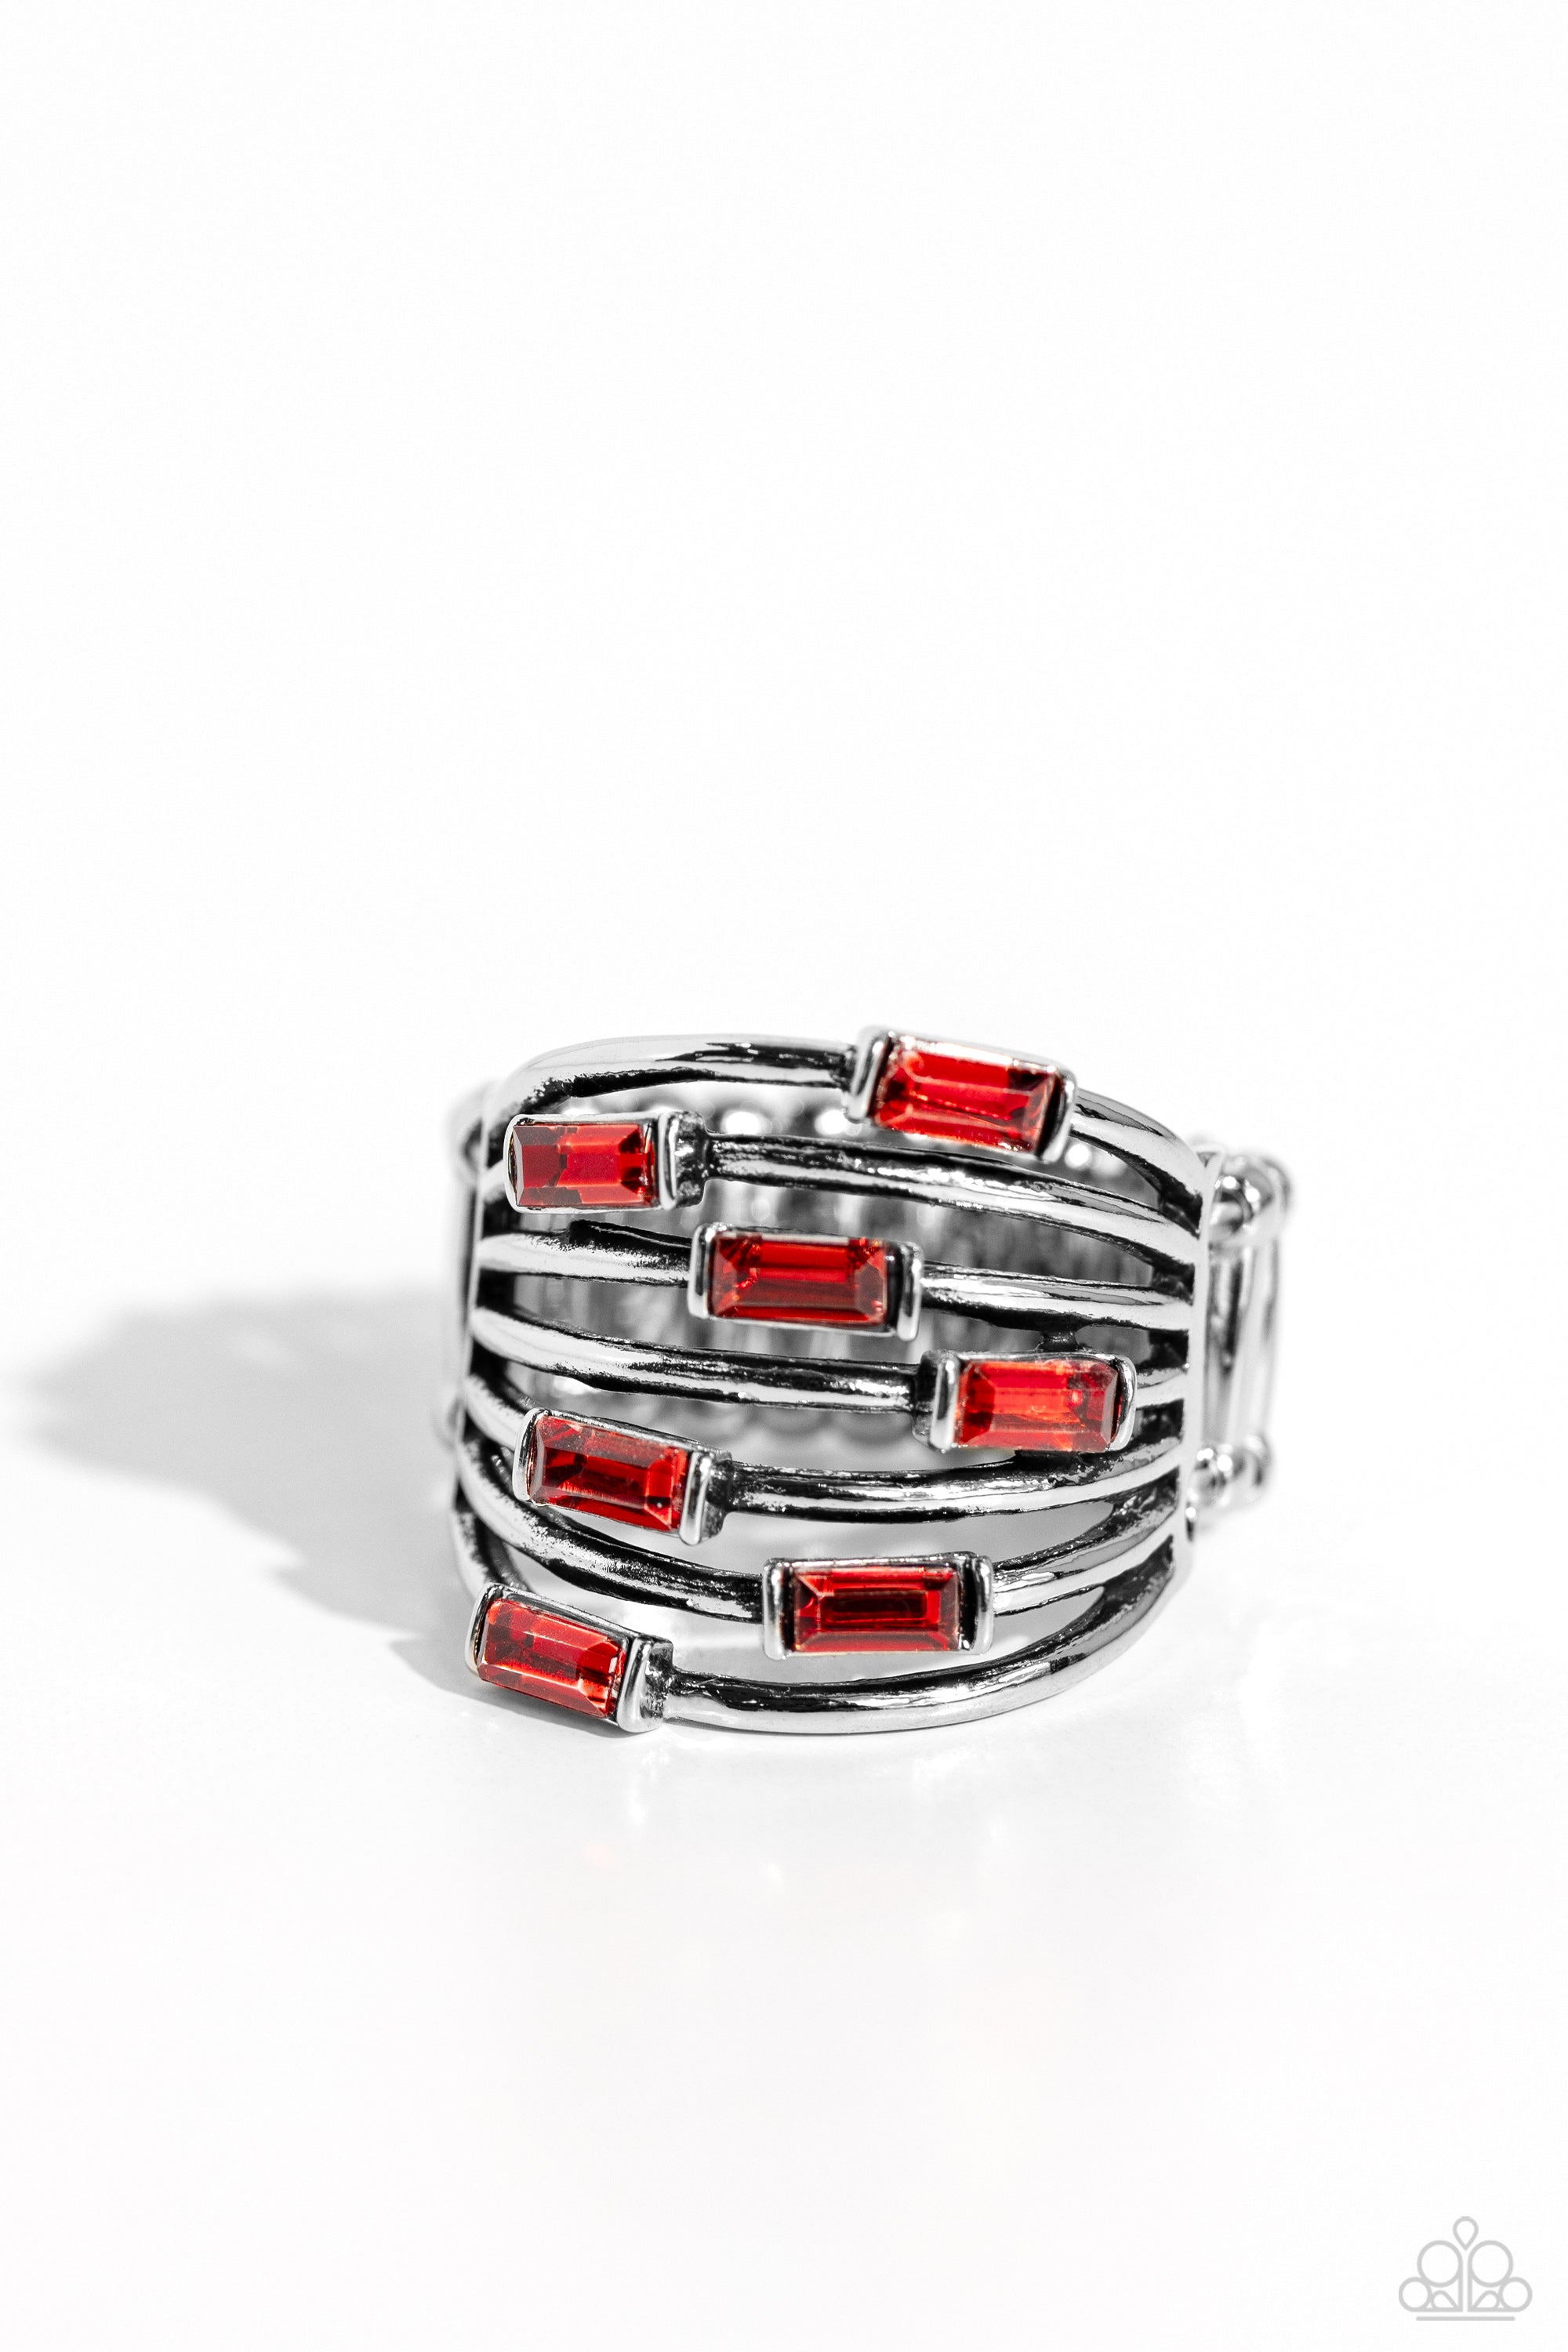 Exceptional Edge Red Rhinestone Ring - Paparazzi Accessories- lightbox - CarasShop.com - $5 Jewelry by Cara Jewels